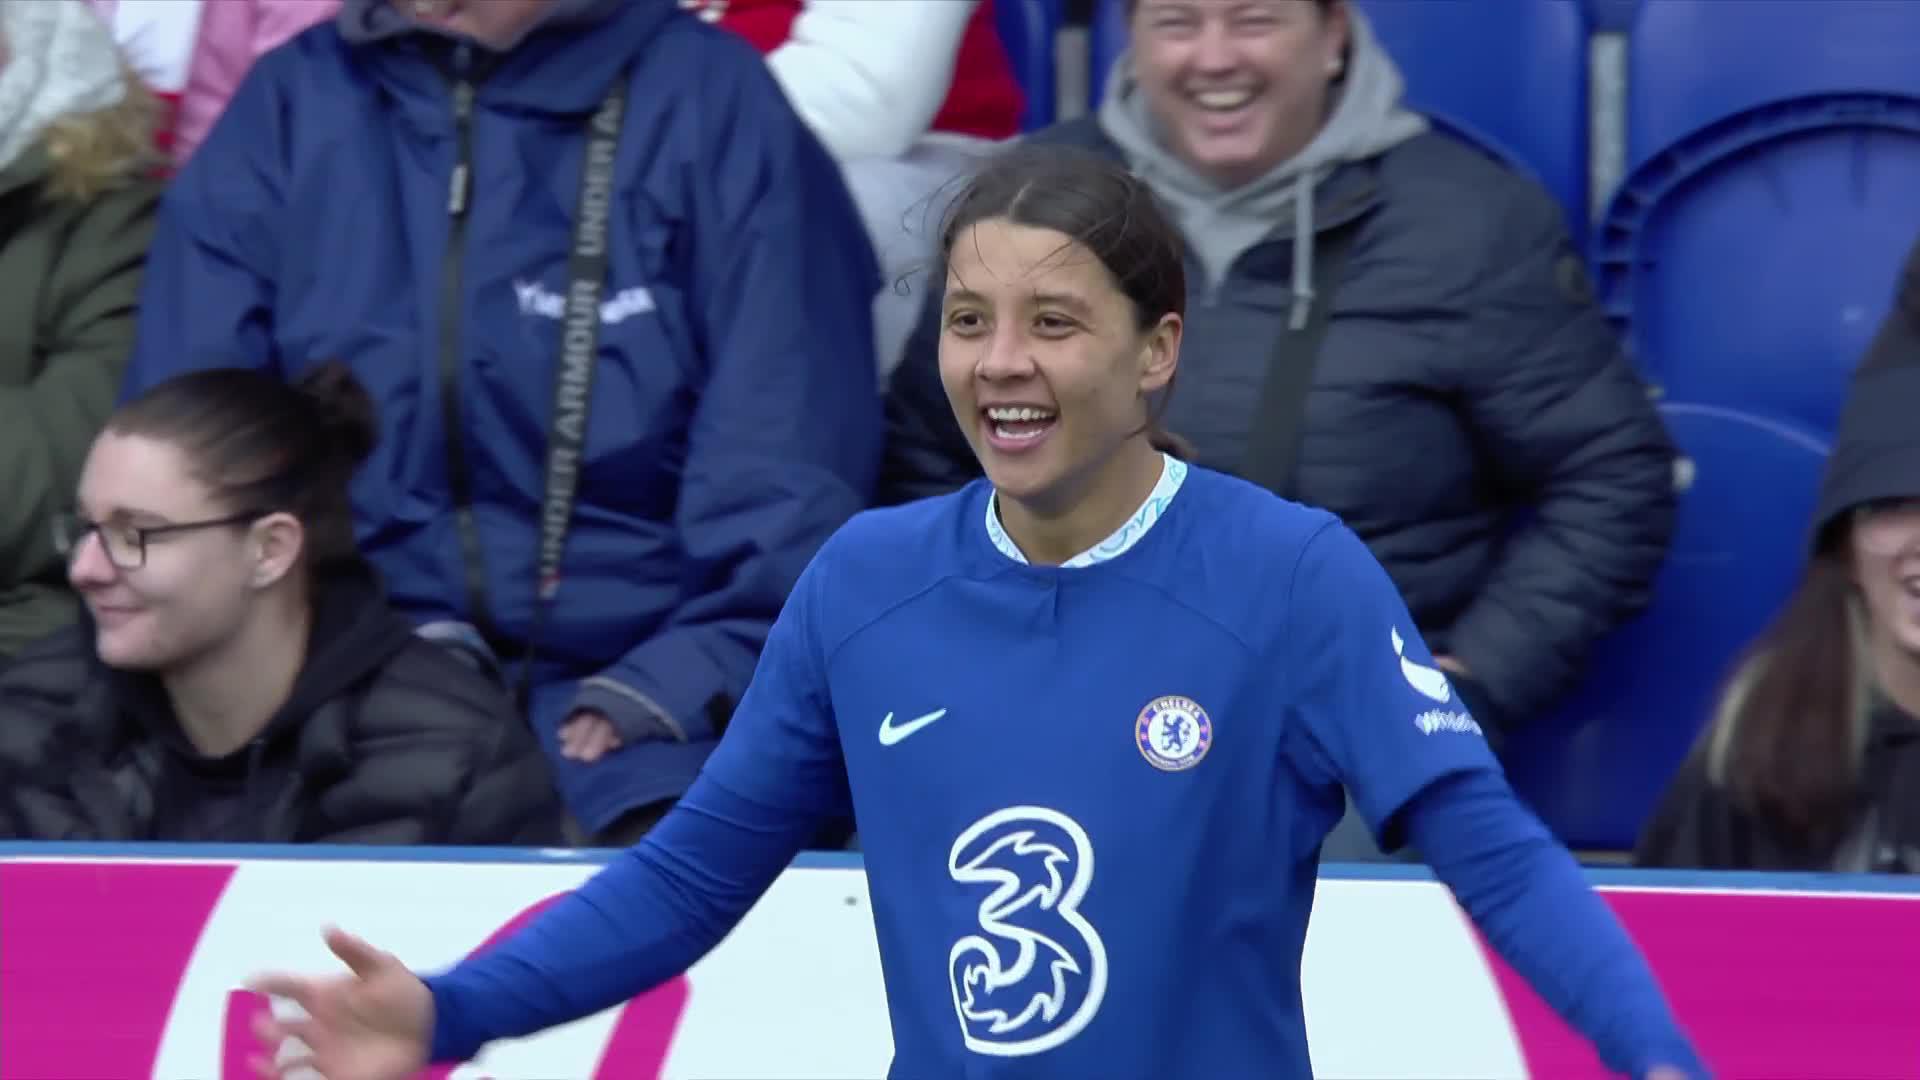 She is inevitable 🔥@samkerr1 gets another #WomensFACup goal on her 100th appearance 